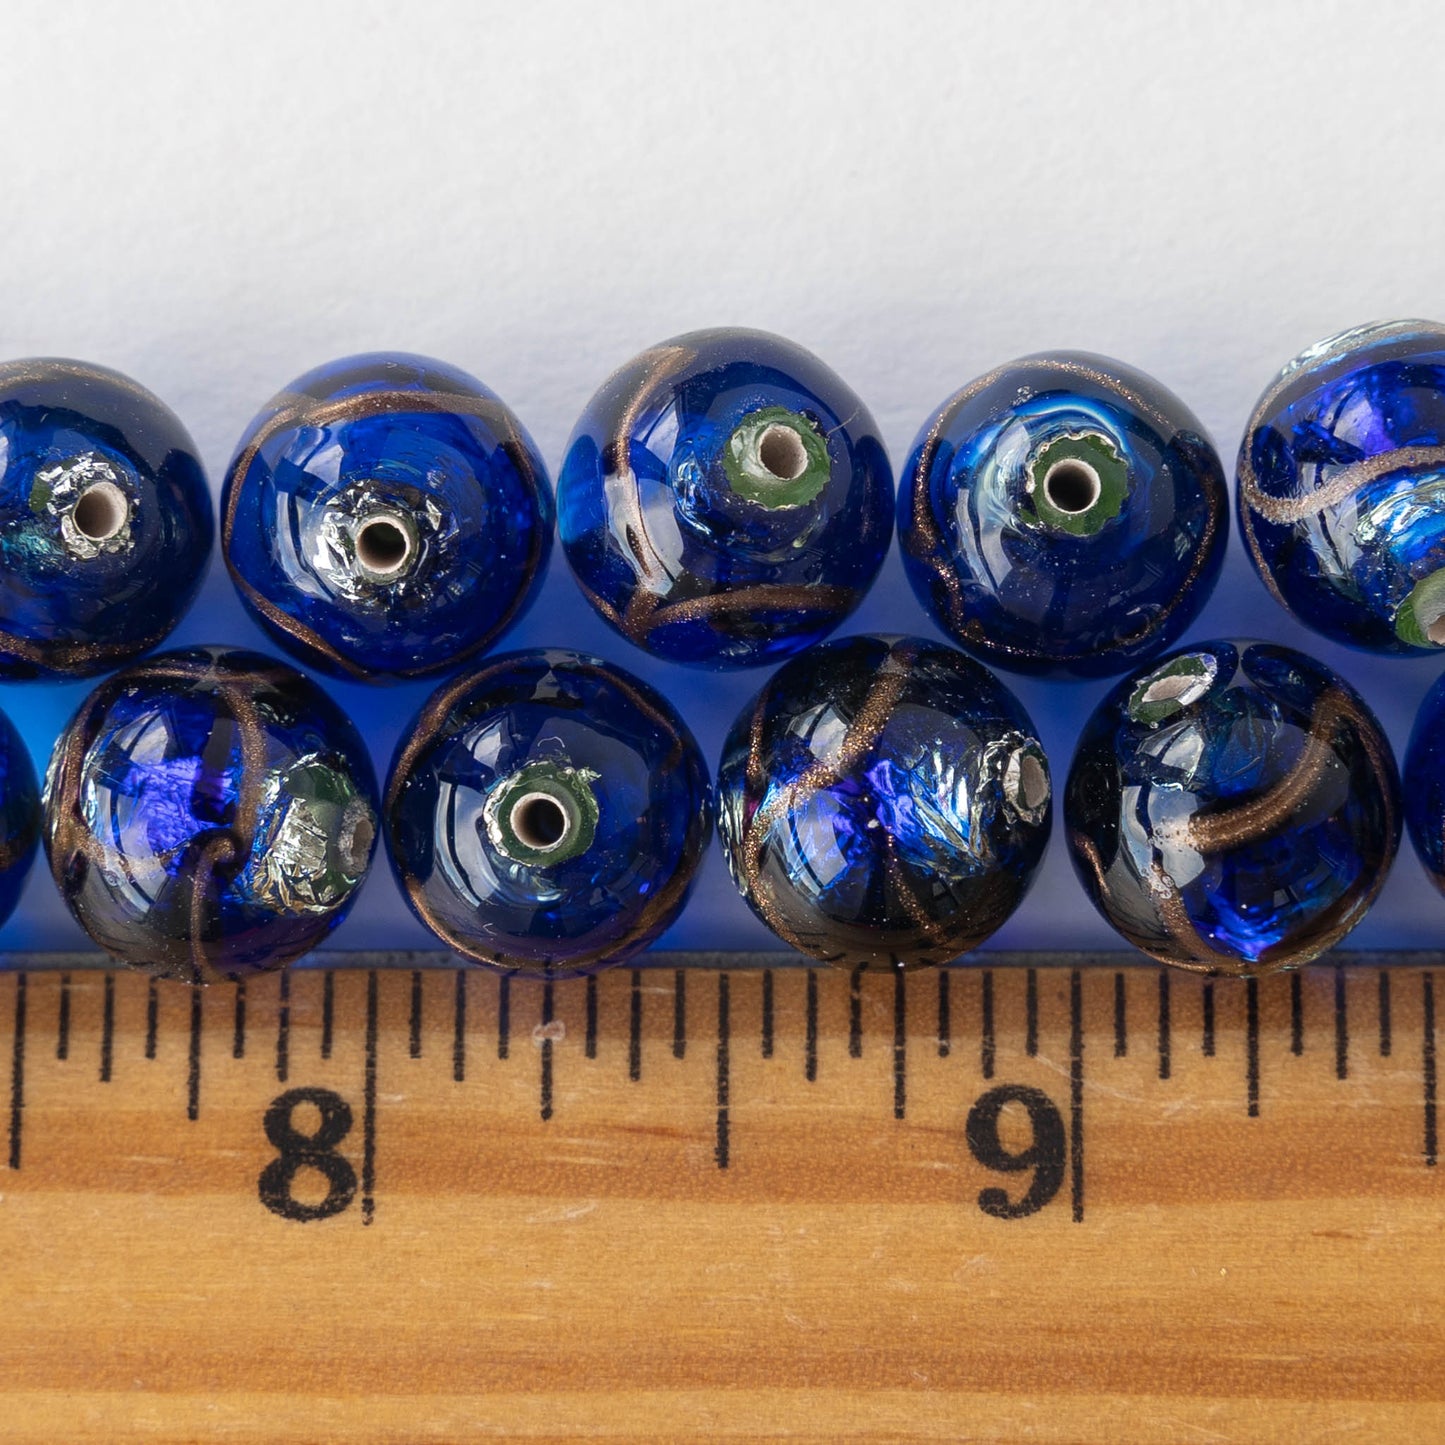 Load image into Gallery viewer, 12mm Handmade Lampwork Foil Beads - Cobalt - 2,4 or 8
